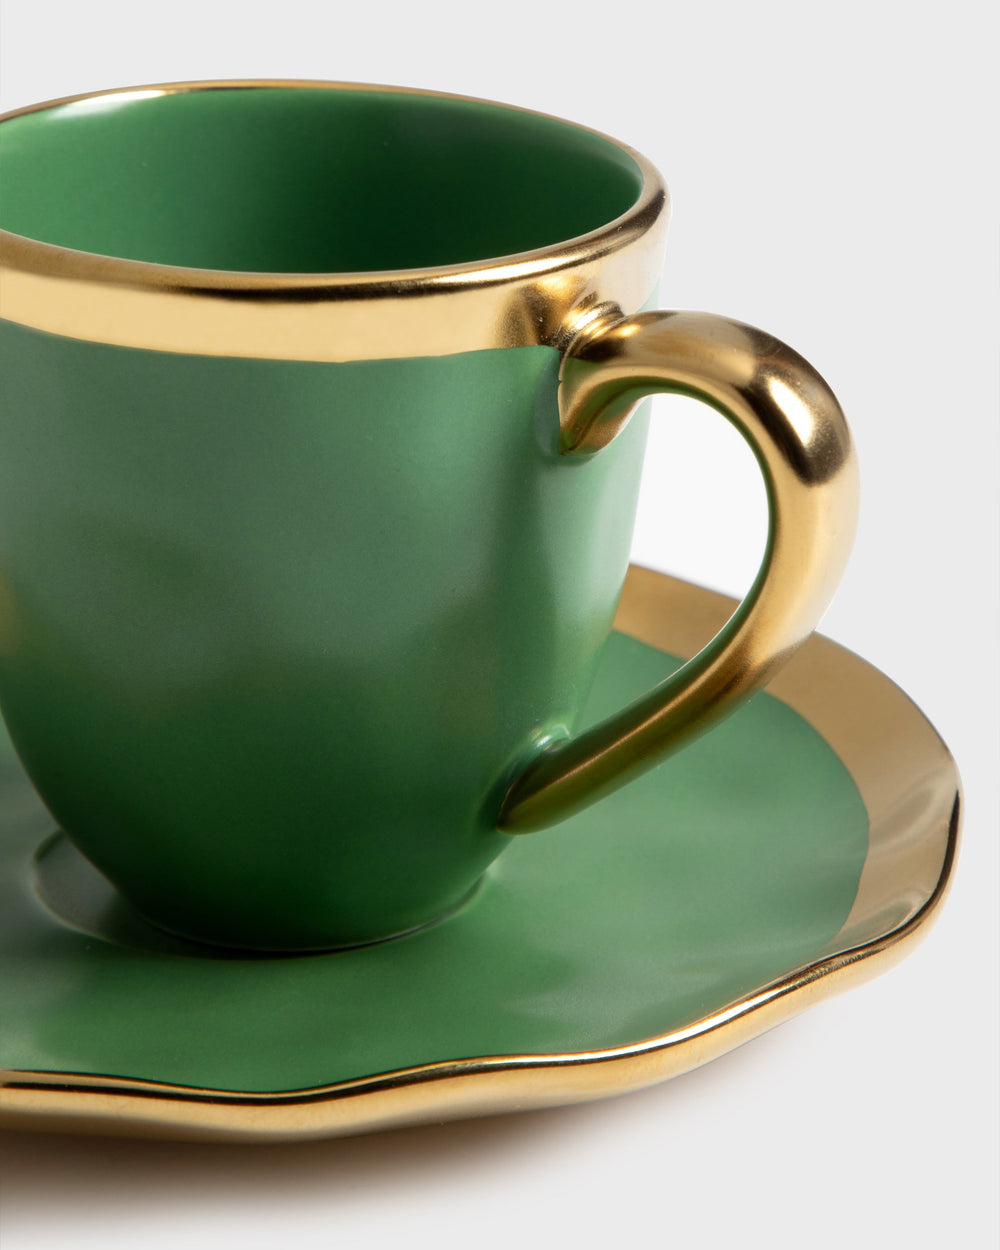 Tania Bulhoes Espresso Cup and Saucer Mediterraneo Green